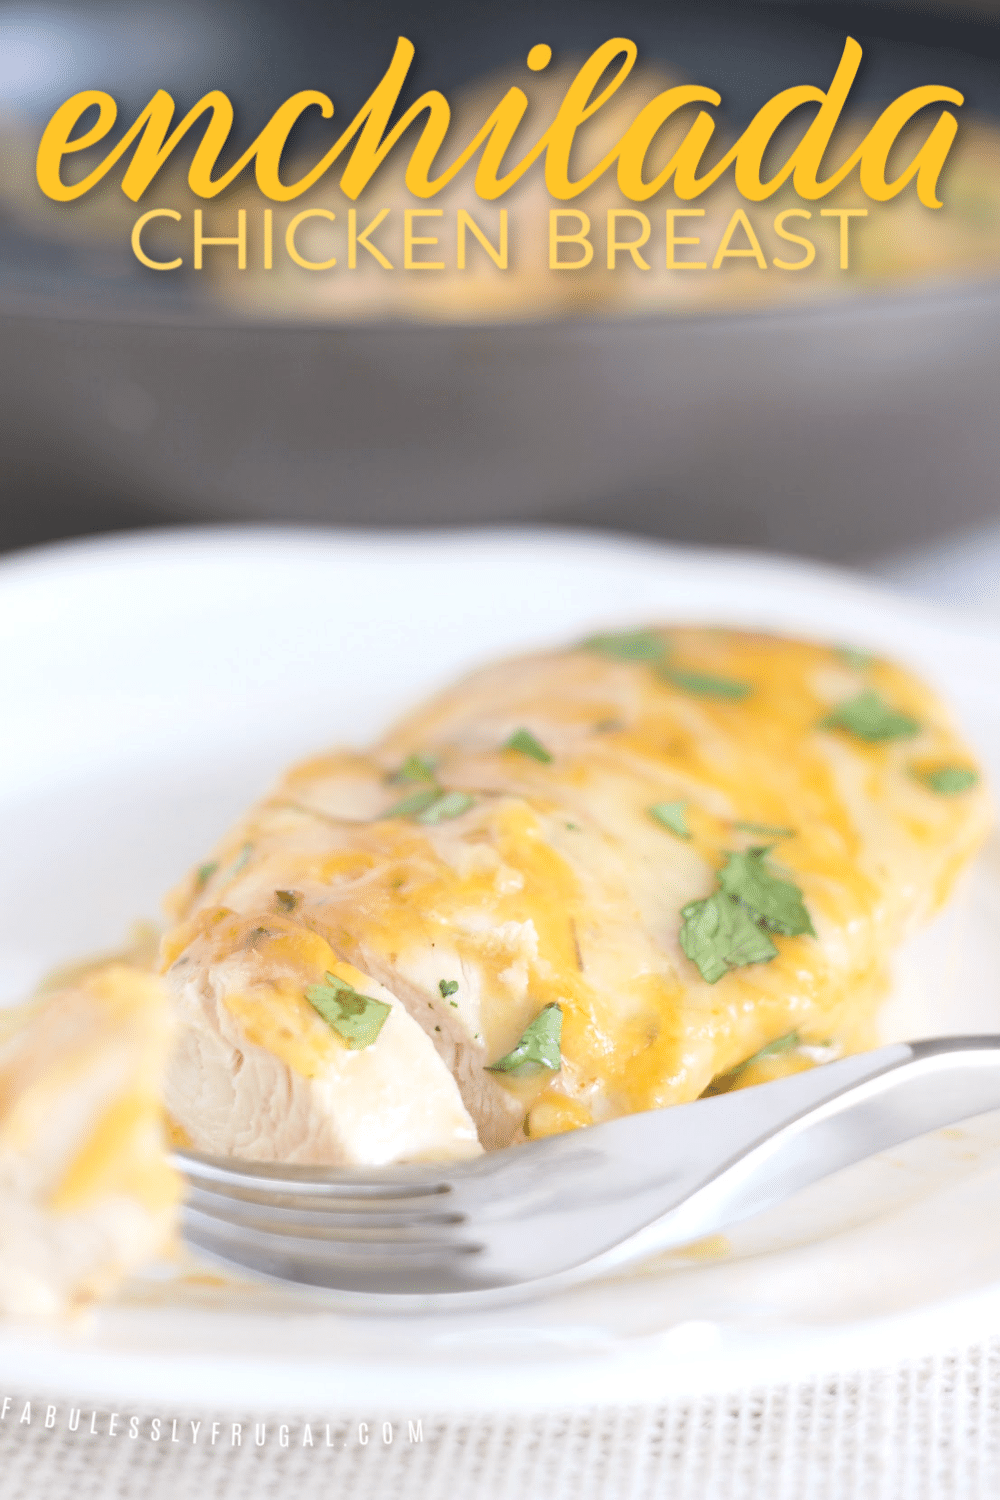 Cut open chicken breast with enchilada sauce